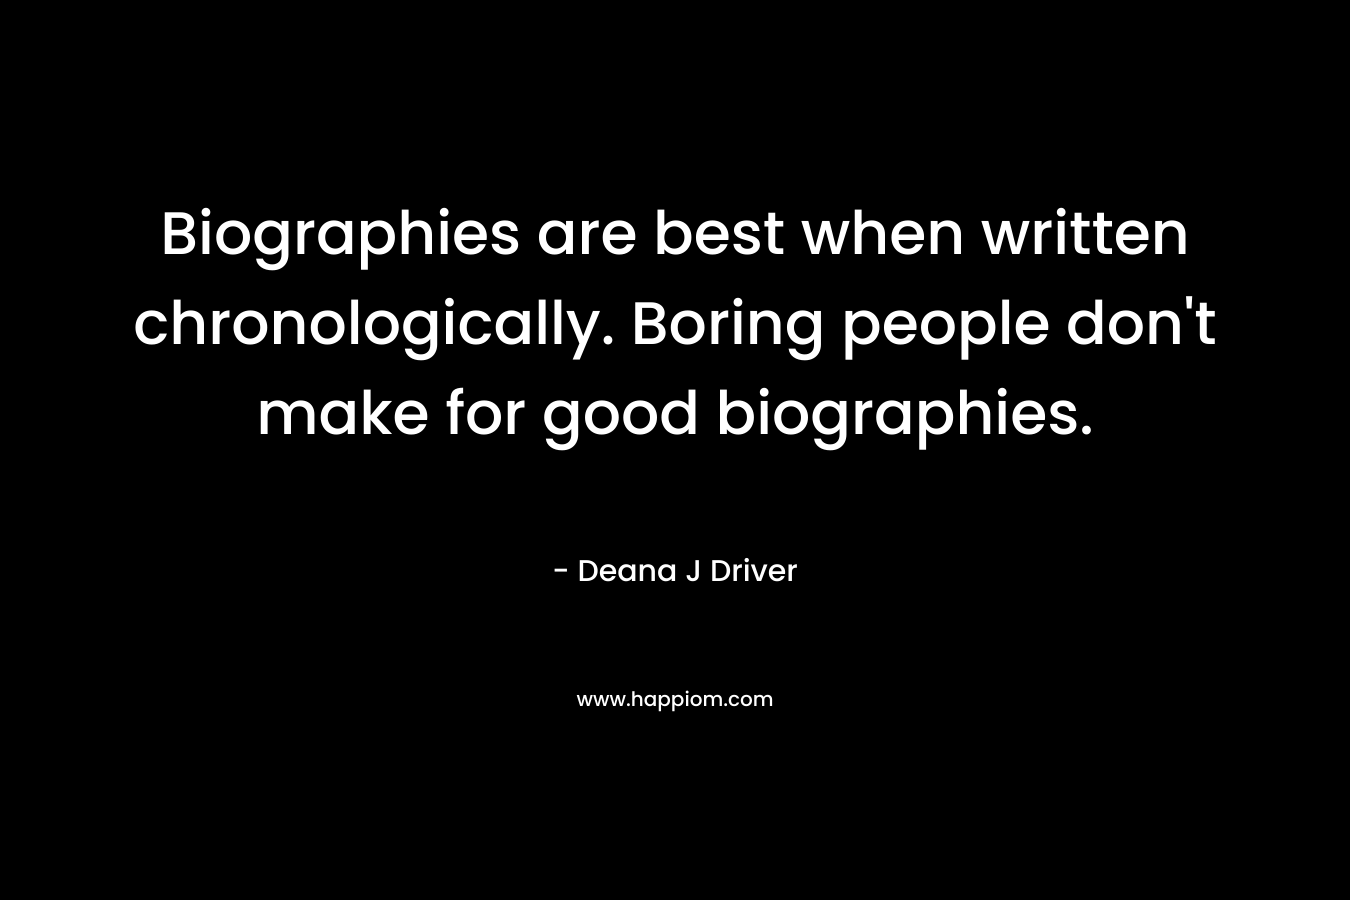 Biographies are best when written chronologically. Boring people don’t make for good biographies. – Deana J Driver